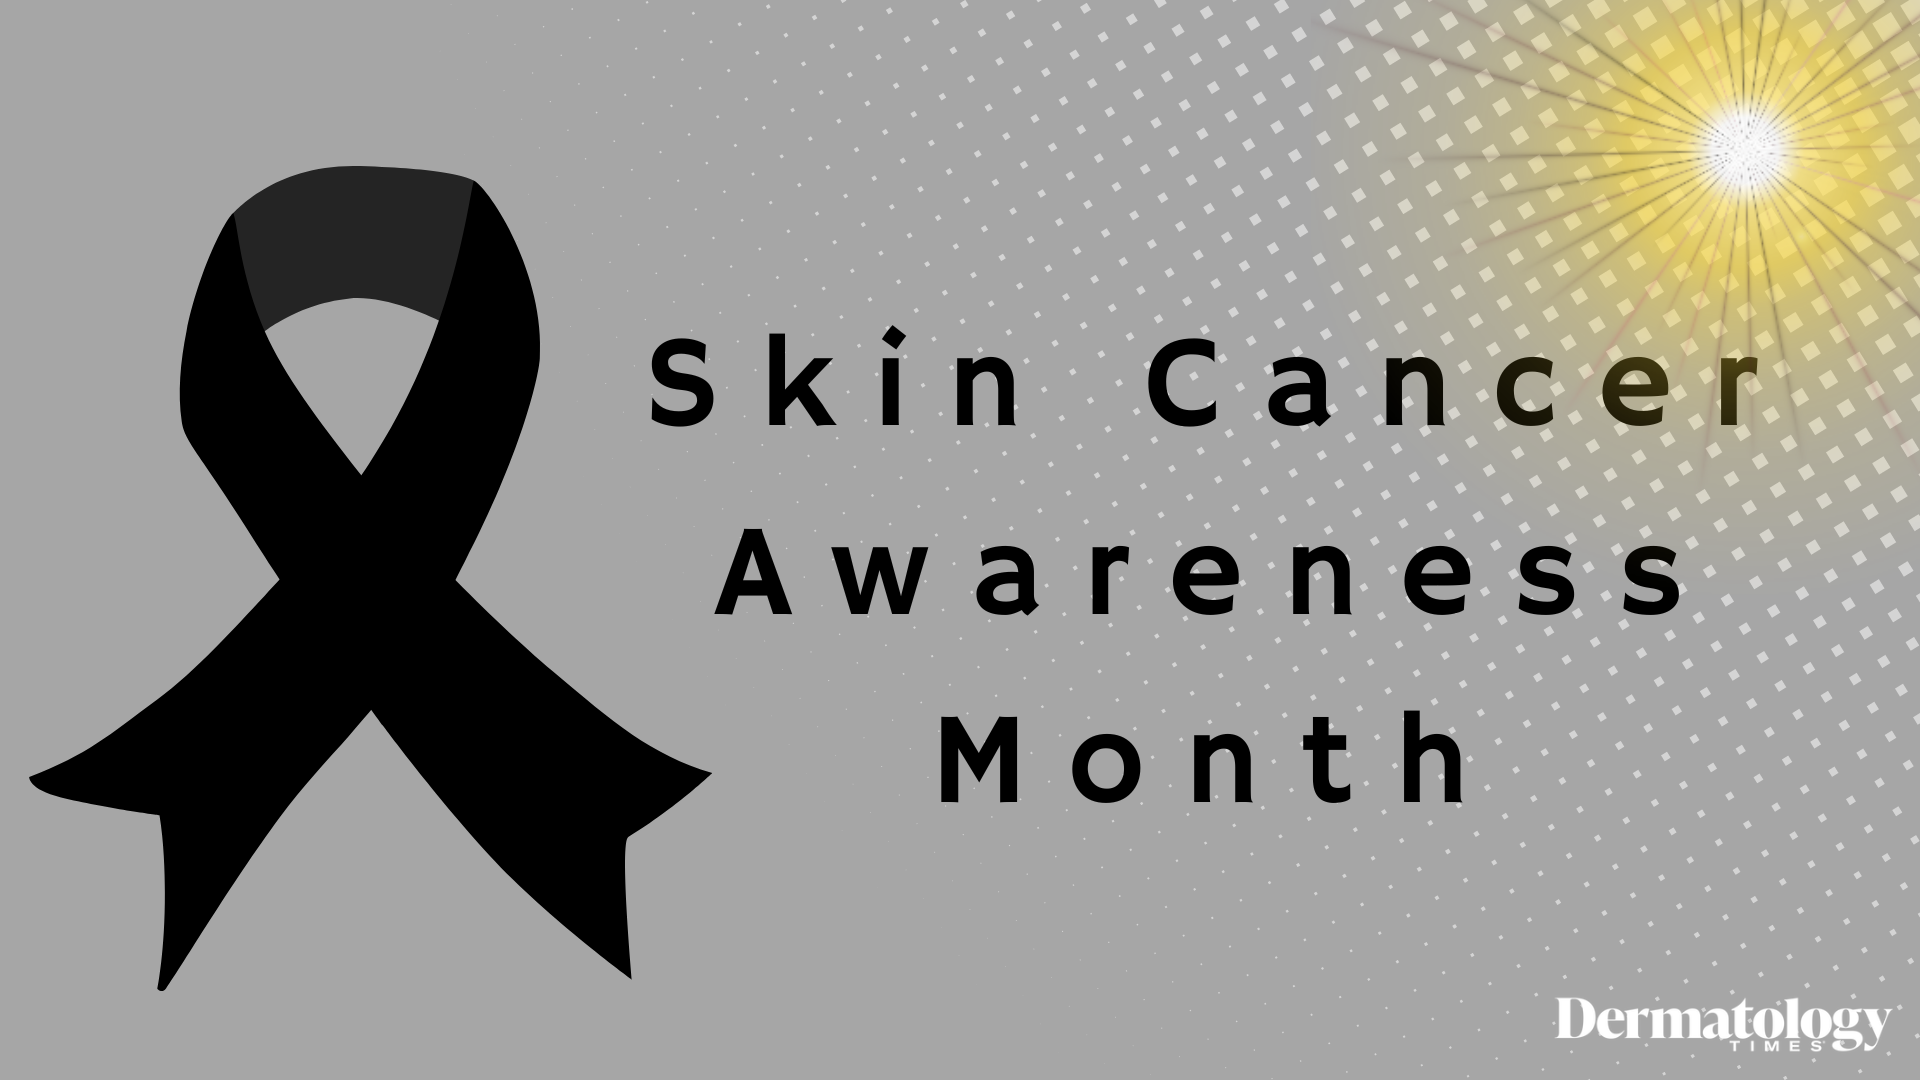 QUIZ: Treatment and Management of Skin Cancer